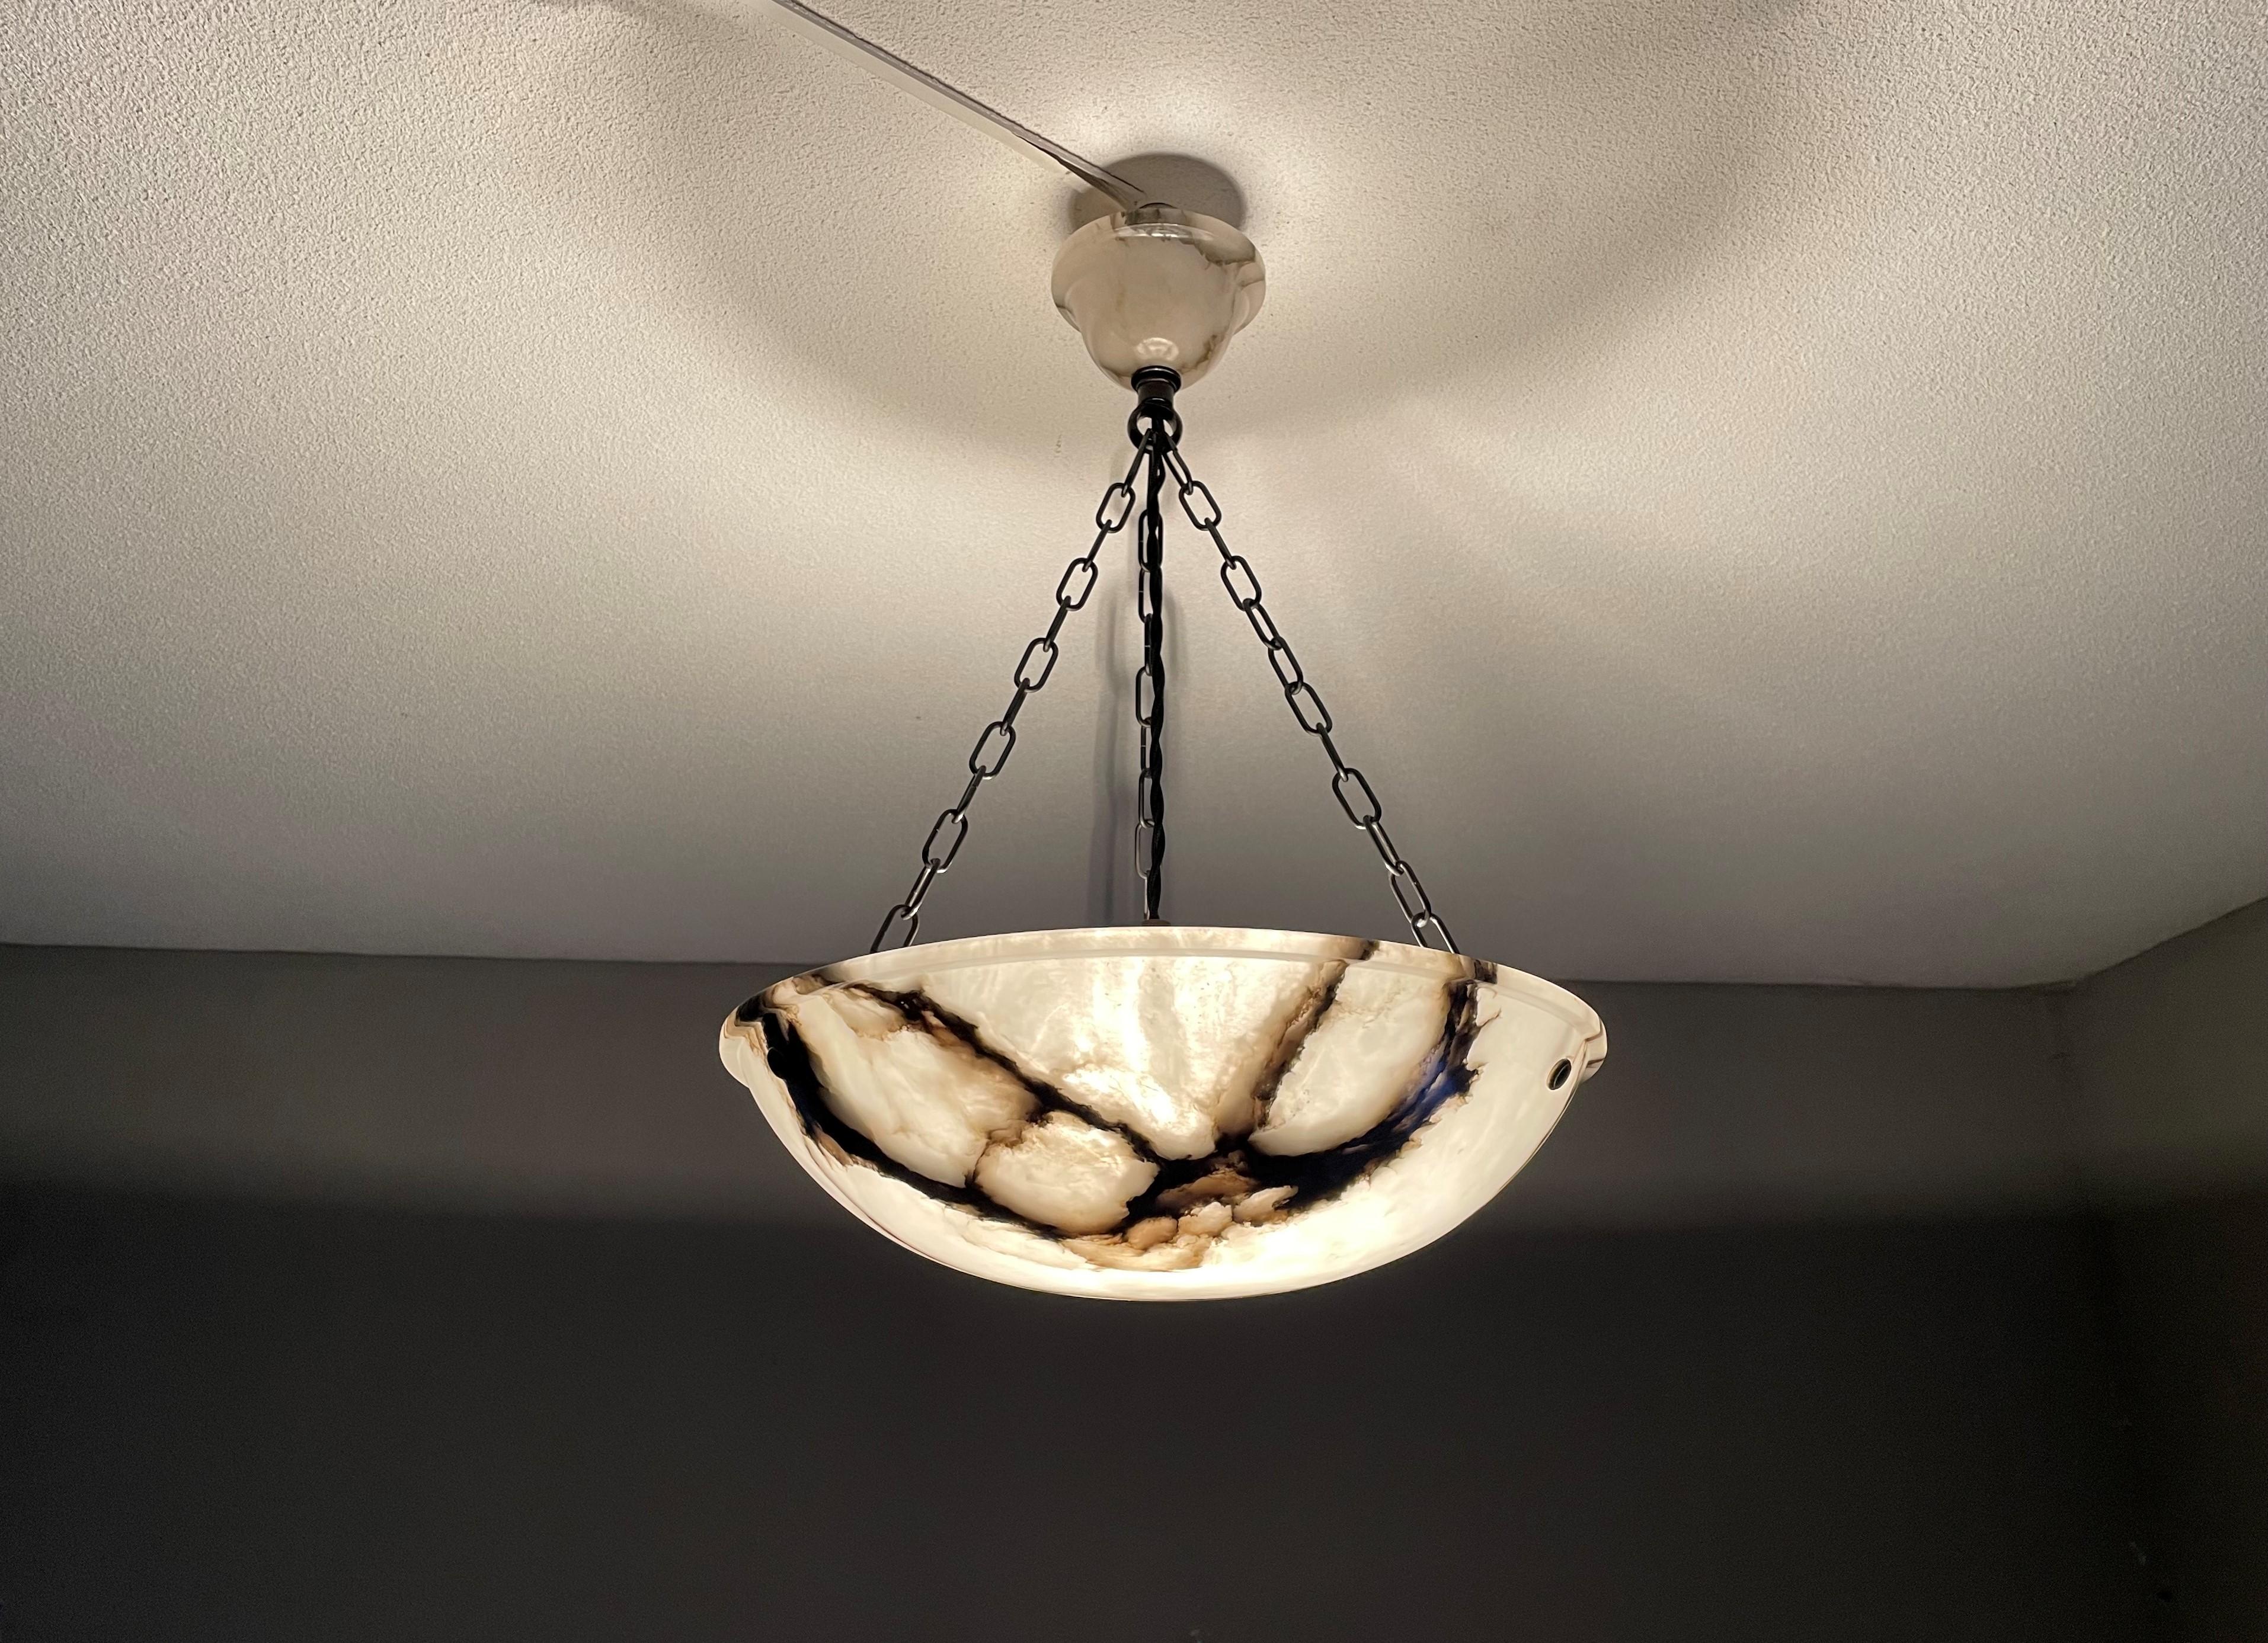 Small and timeless Art Deco pendant light with perfect black veins.

With early 20th century lighting as one of our specialities, finding an excellent condition and highly attractive fixture always makes our day. This practical size specimen has